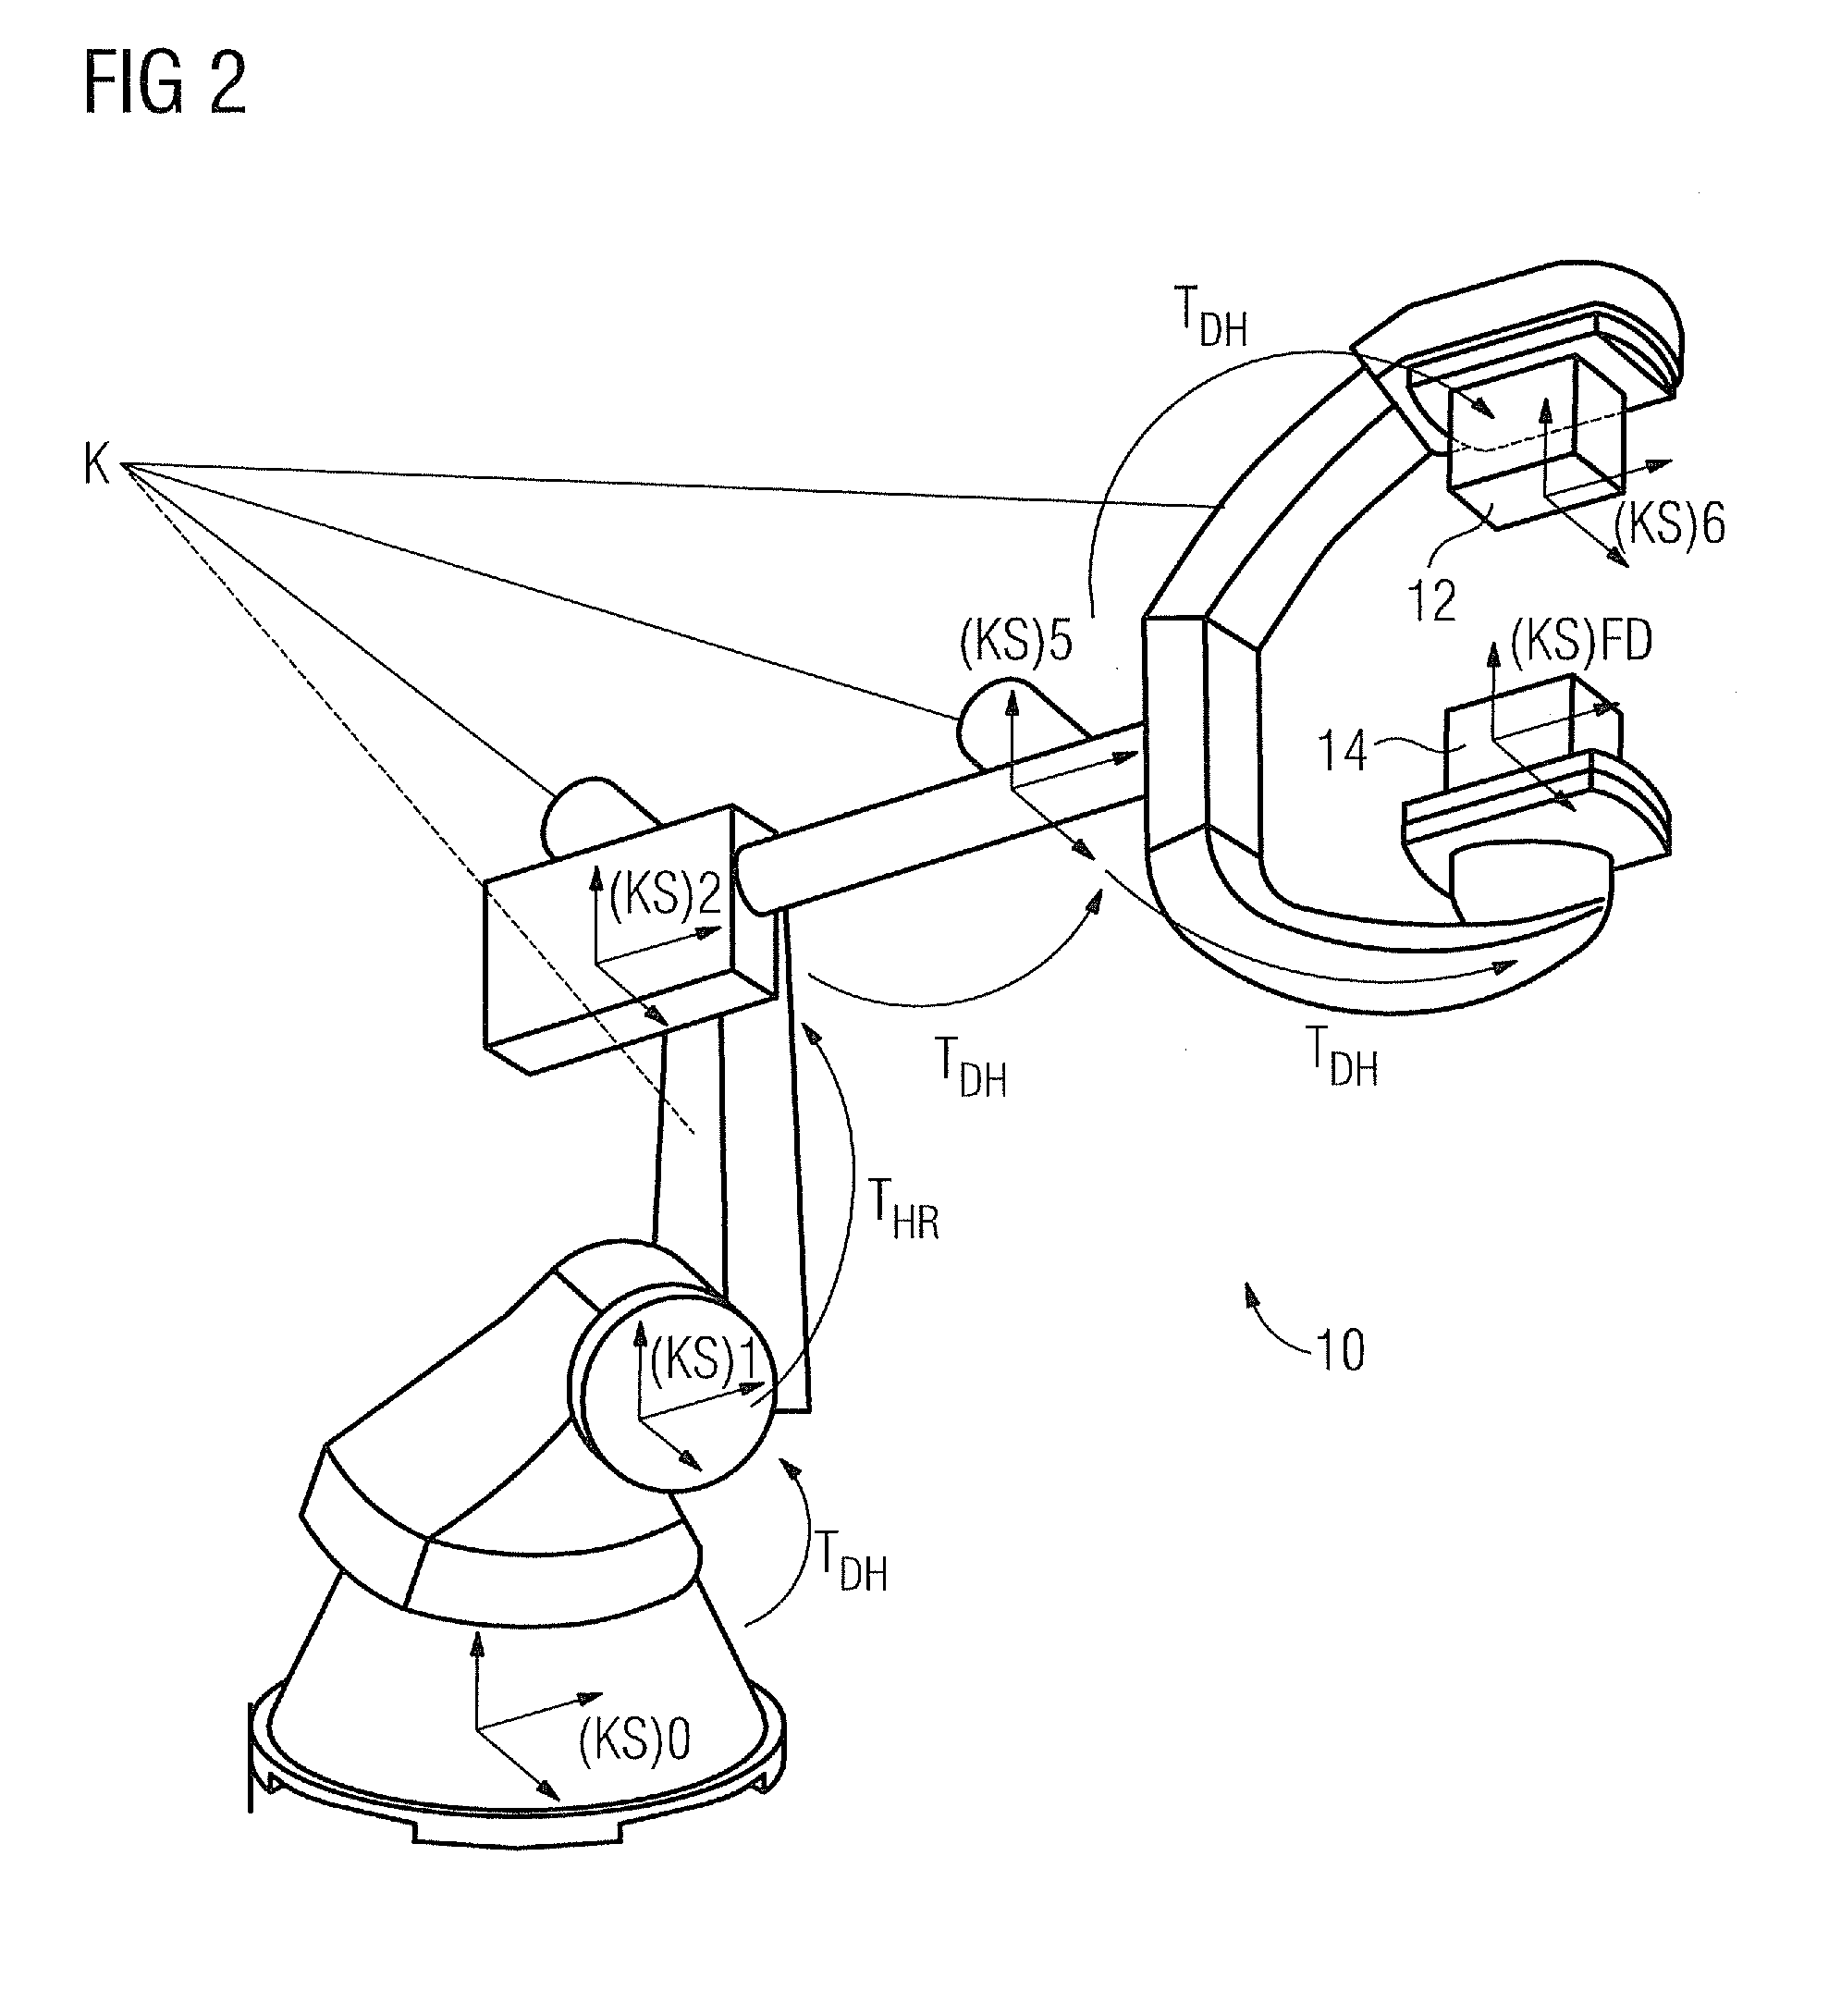 Method for obtaining a 3D image dataset of an object of interest